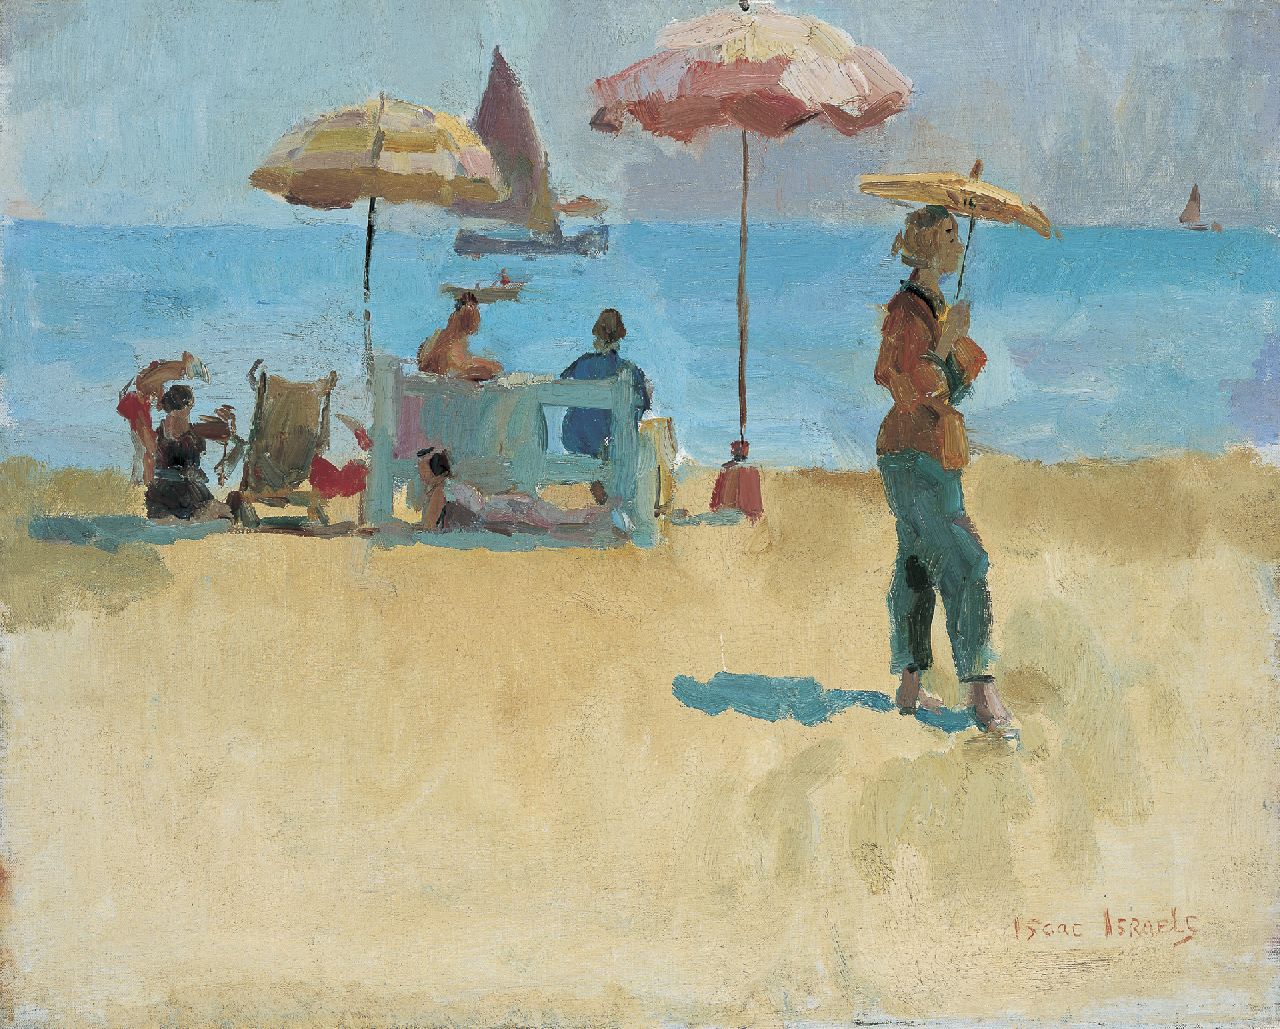 Israels I.L.  | 'Isaac' Lazarus Israels, Figures on the beach, oil on canvas 40.1 x 50.3 cm, signed l.r.